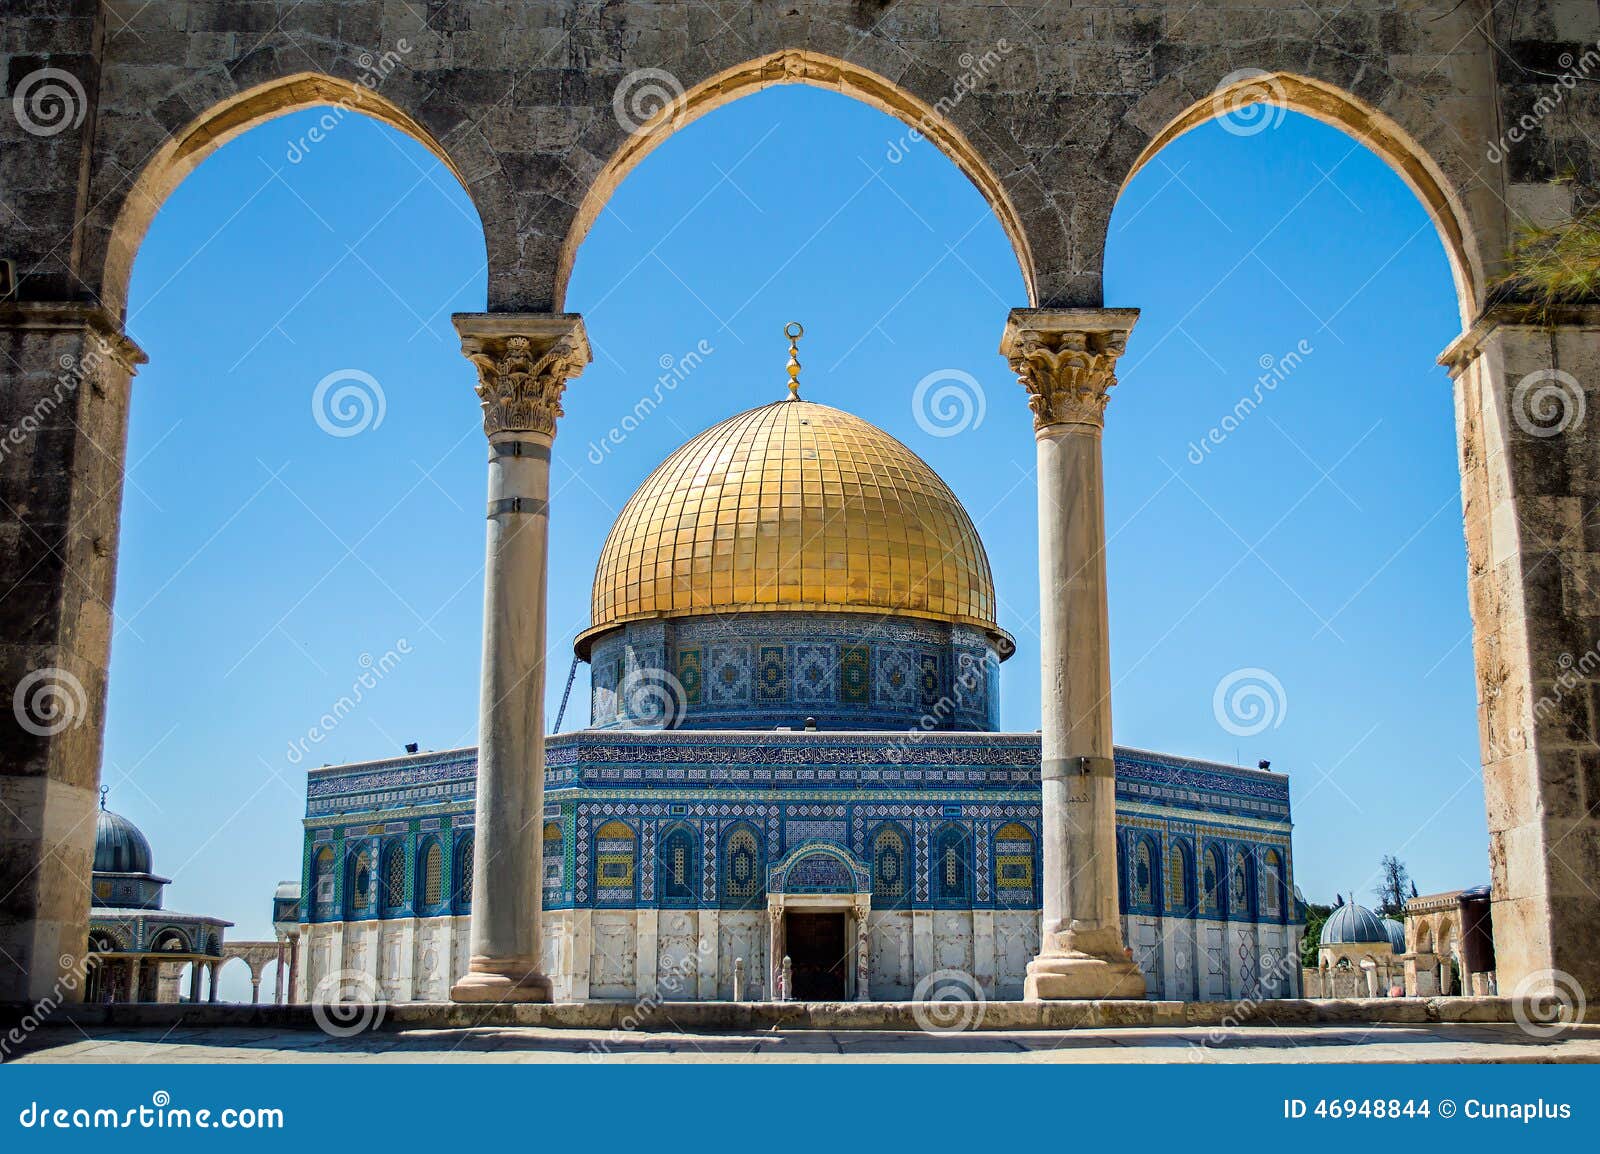 dome of the rock on the temple